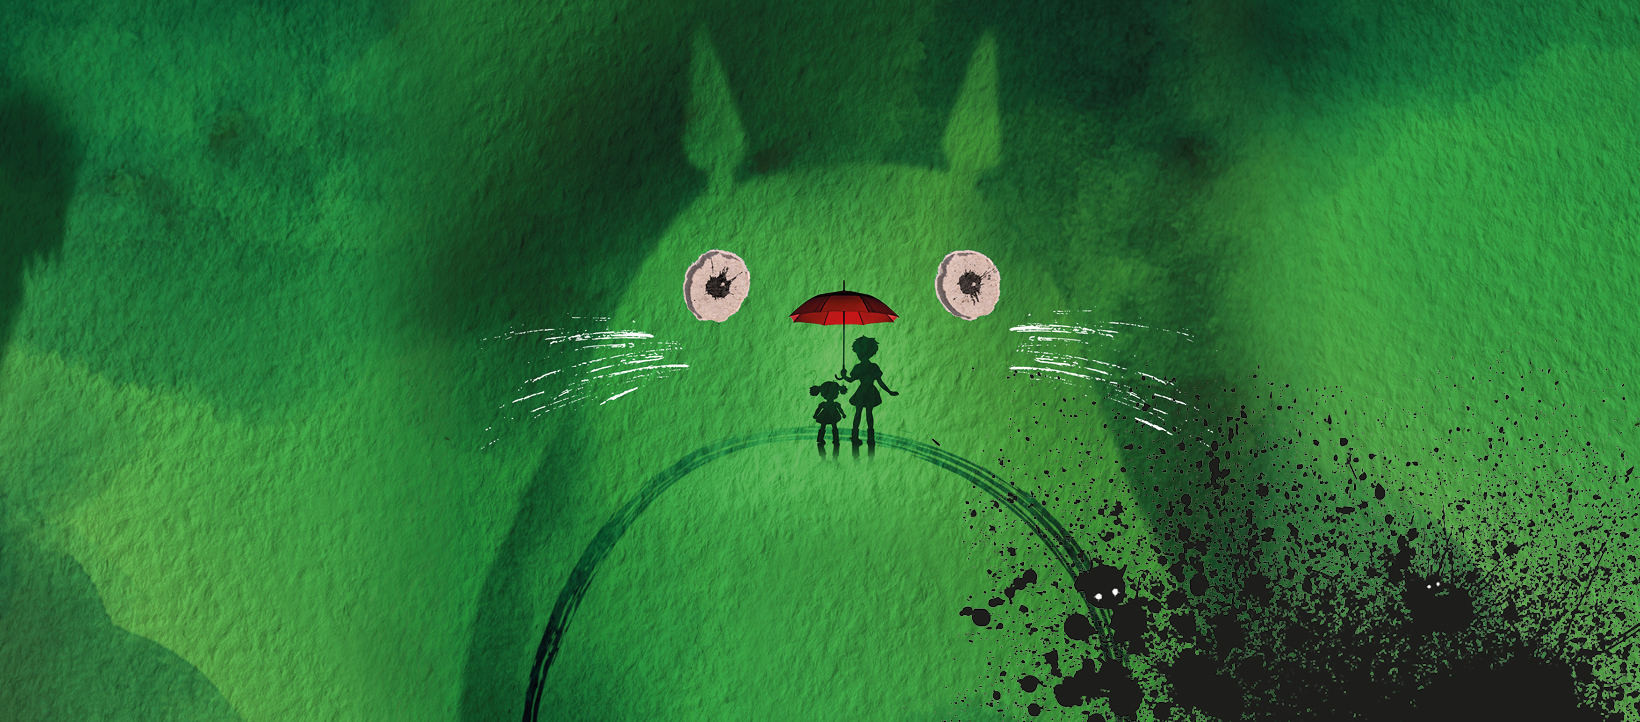 A green background with the outline of a creature. Two silhouetted children in the centre hold up a red umbrella where the creature's nose would be.